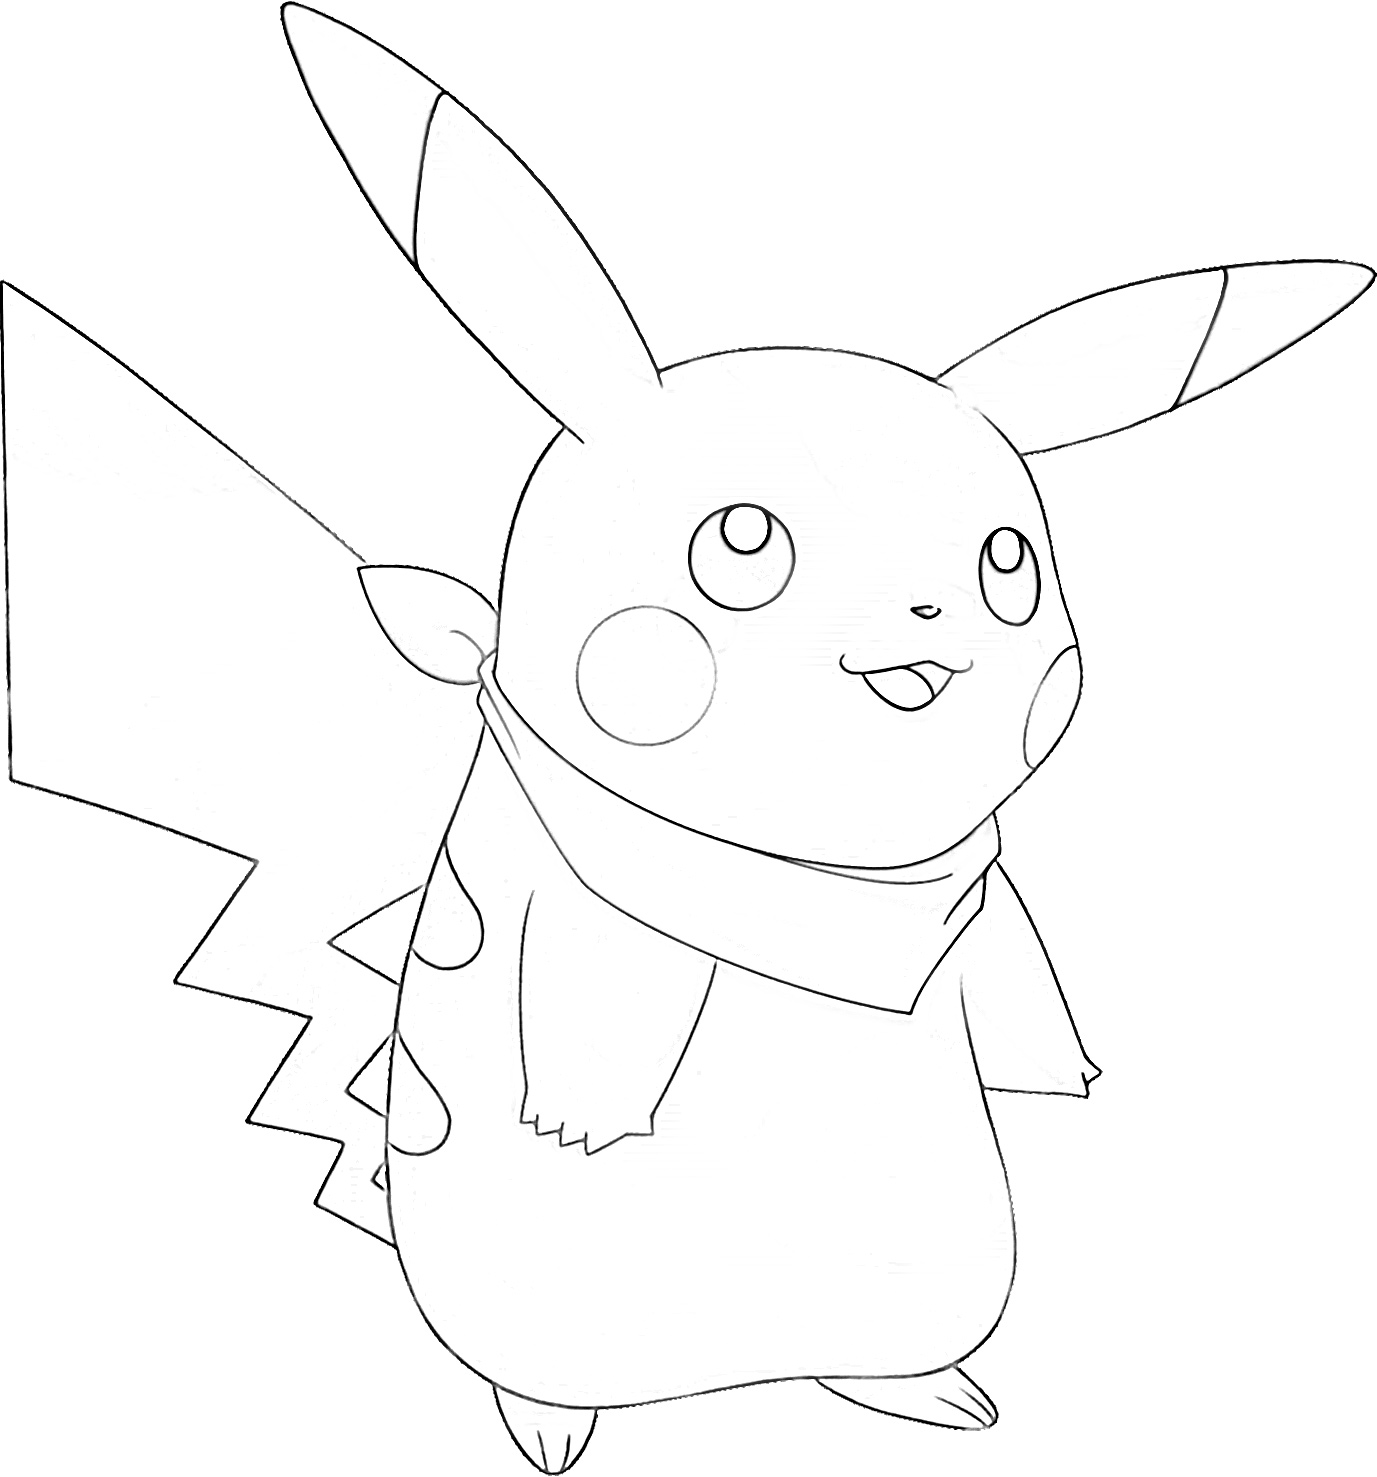 Pikachu wearing a scarf coloring page